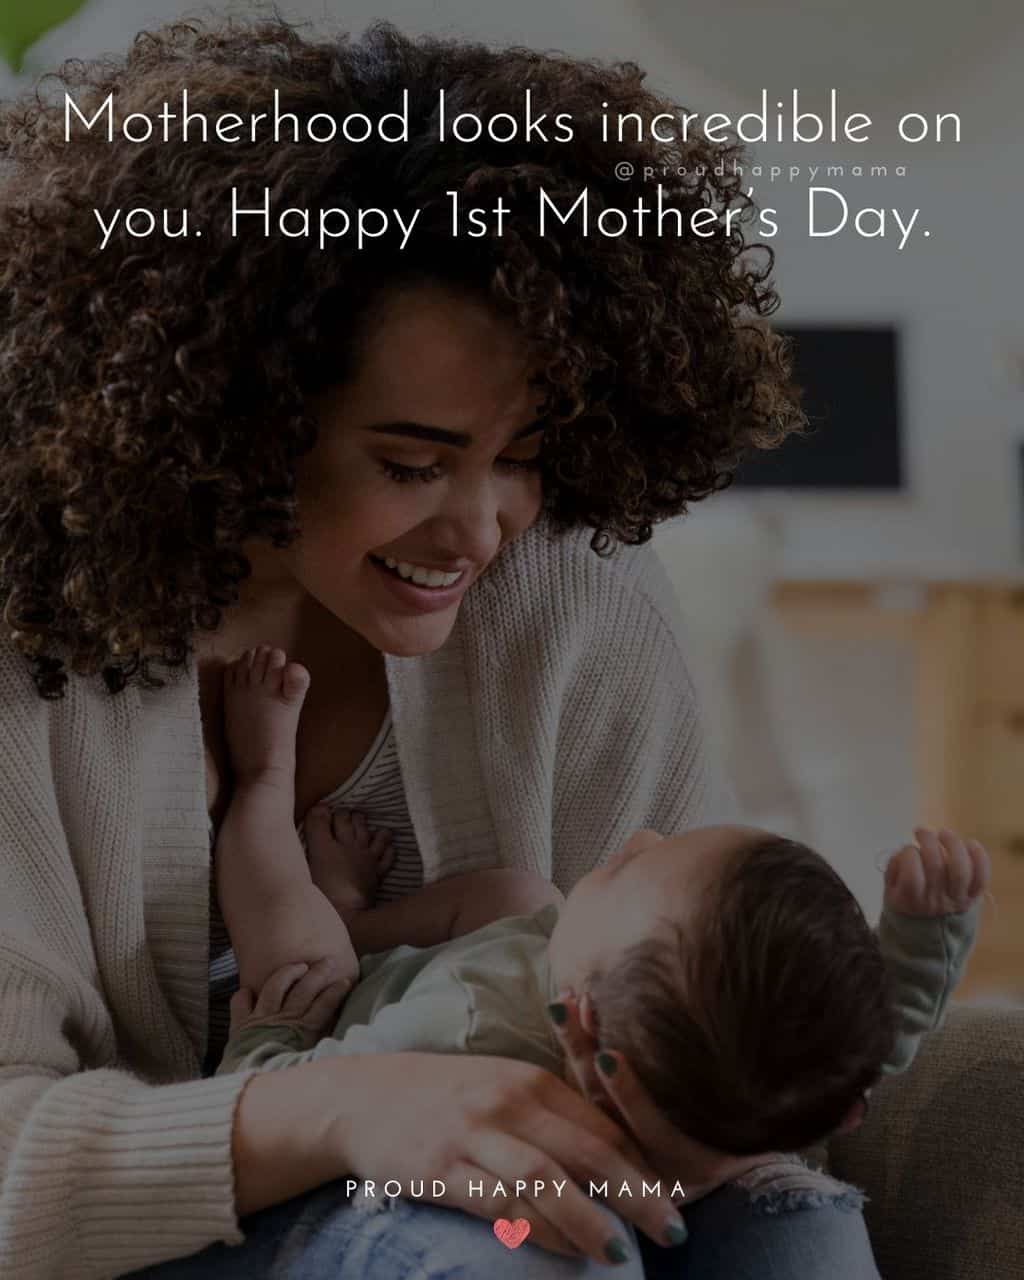 First Mothers Day Quotes - Motherhood looks incredible on you. Happy 1st Mother’s Day.’